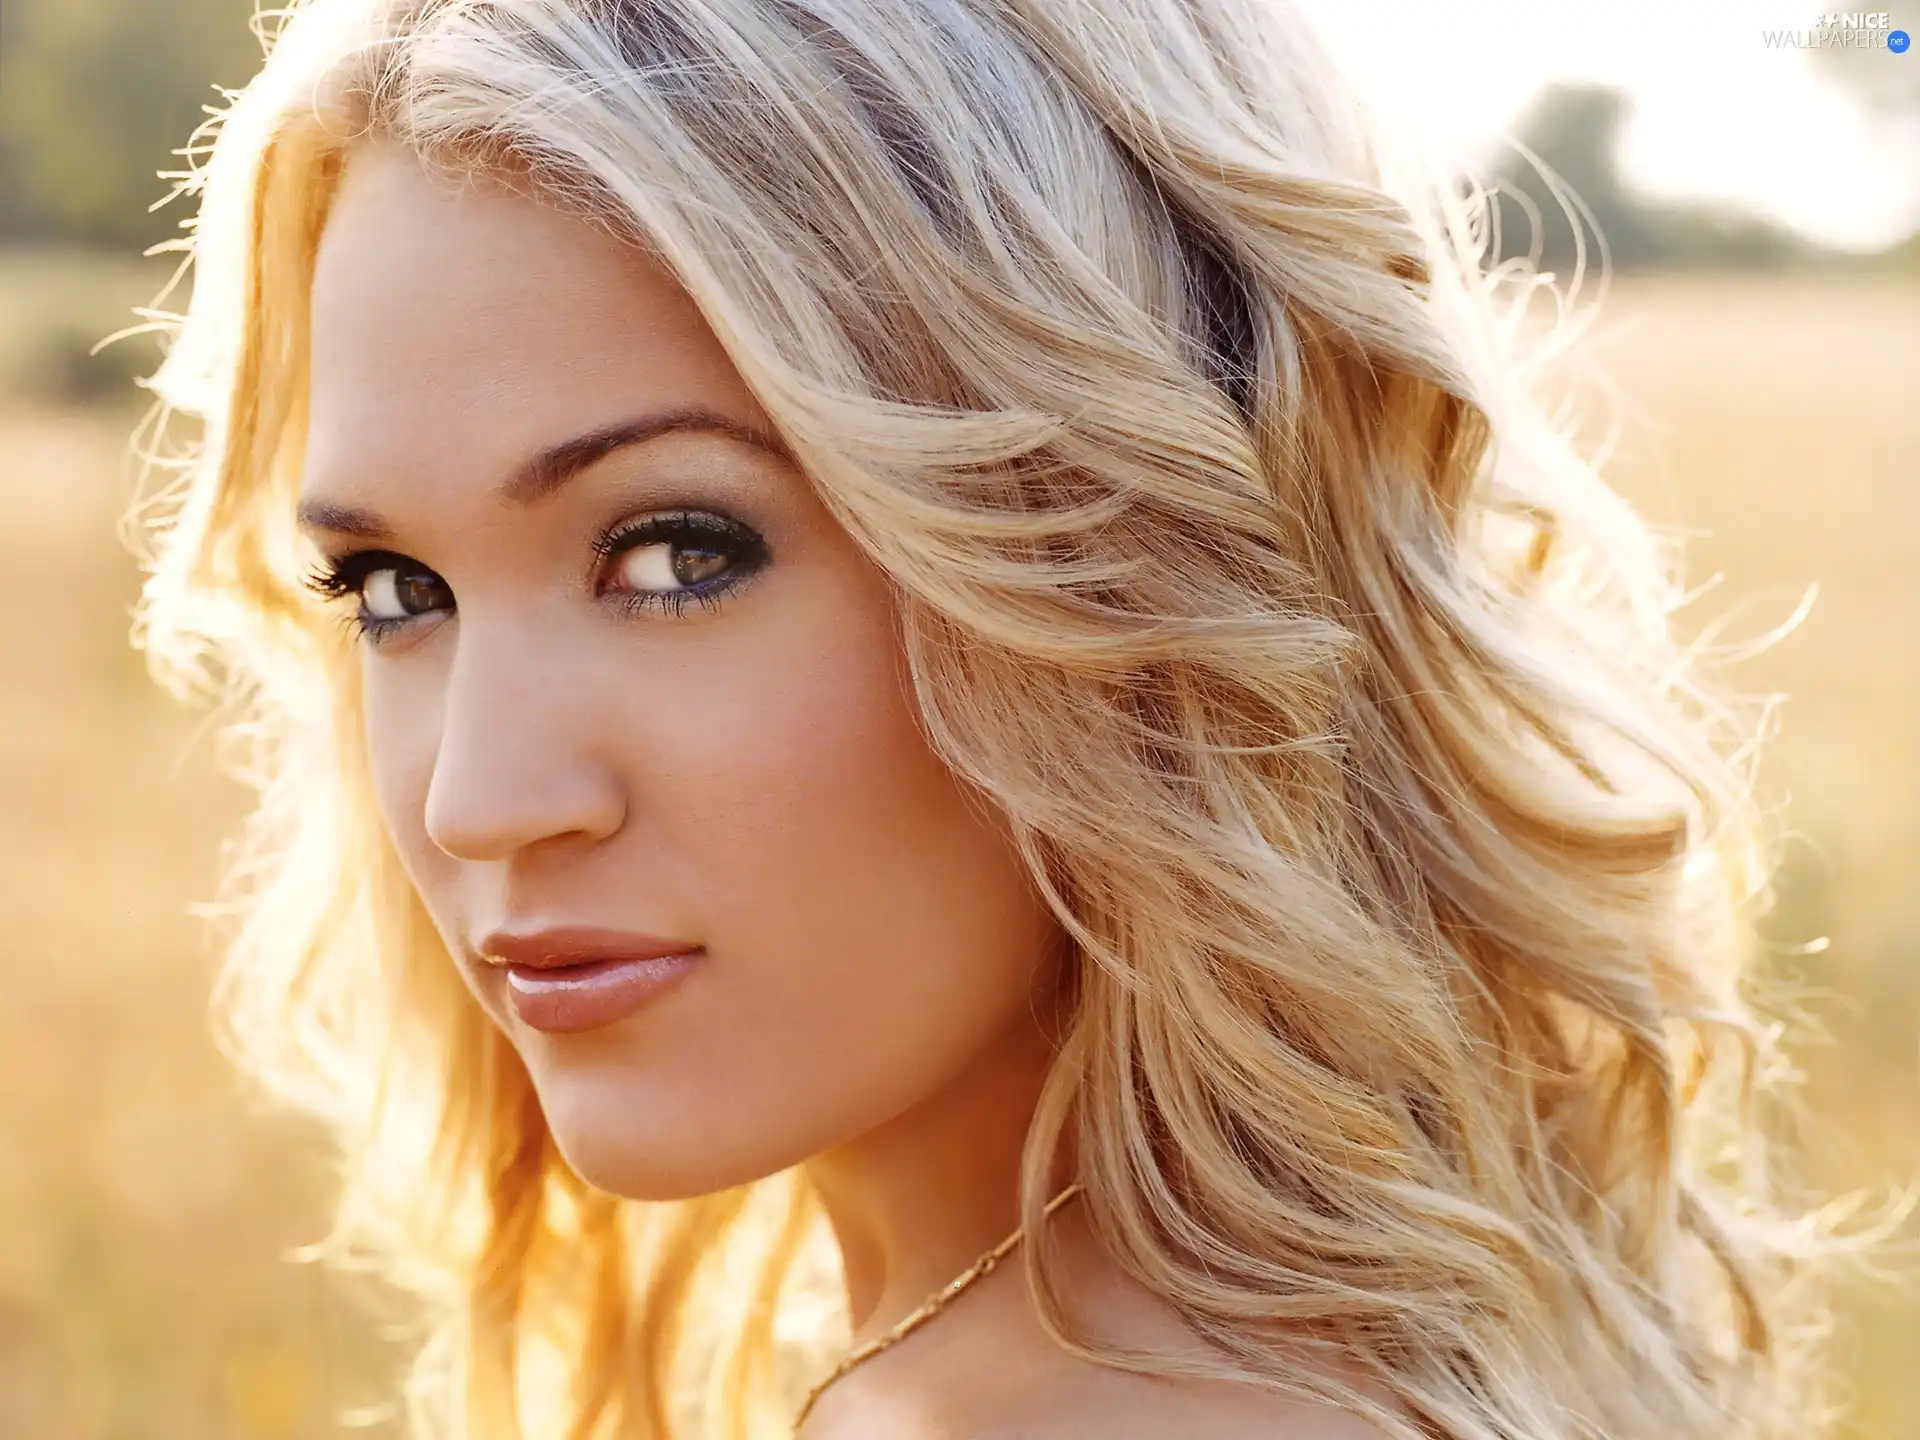 songster, Carrie Underwood